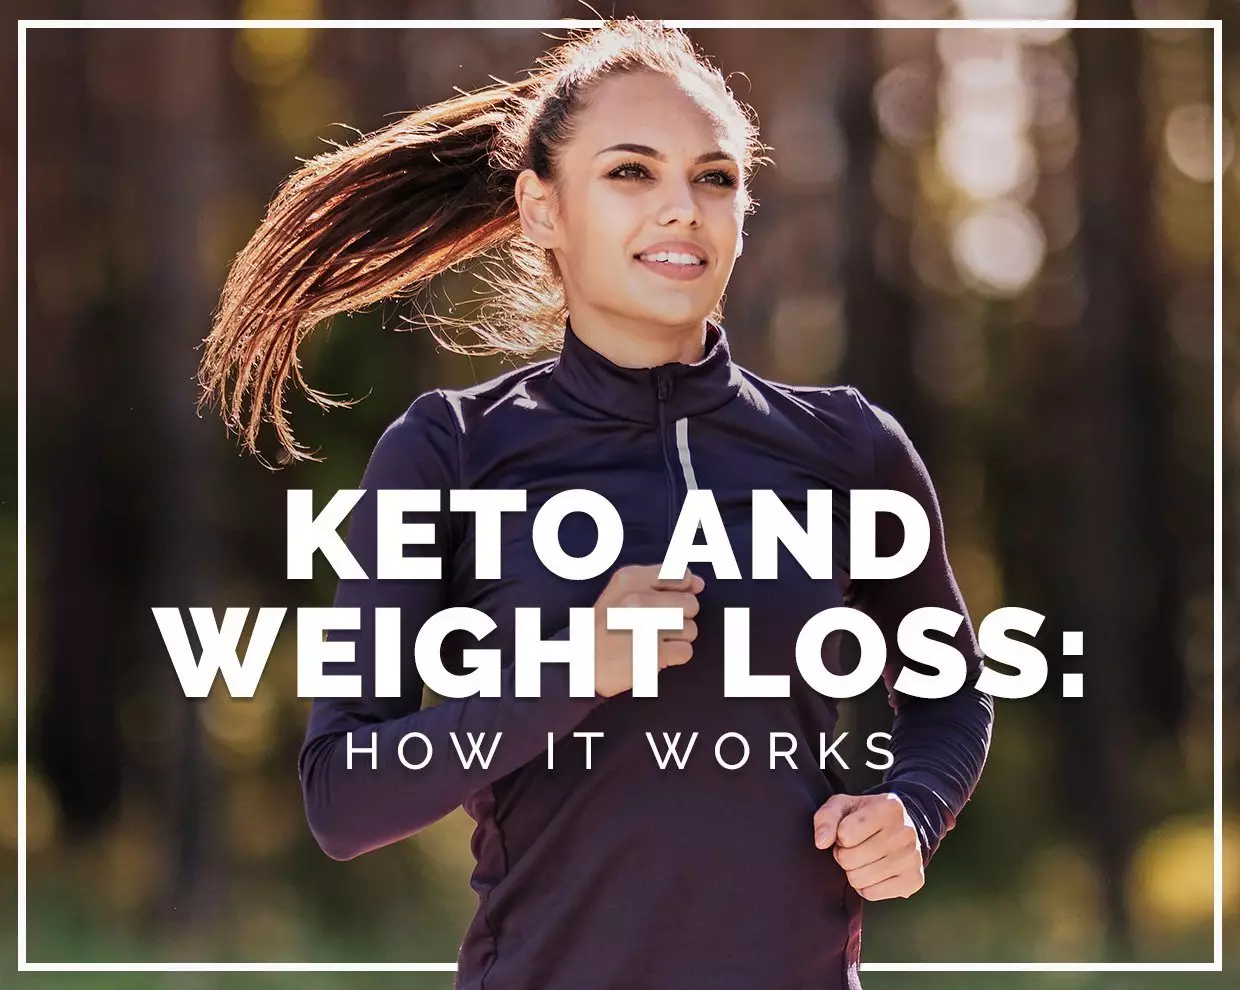 Keto and weight loss: How it works